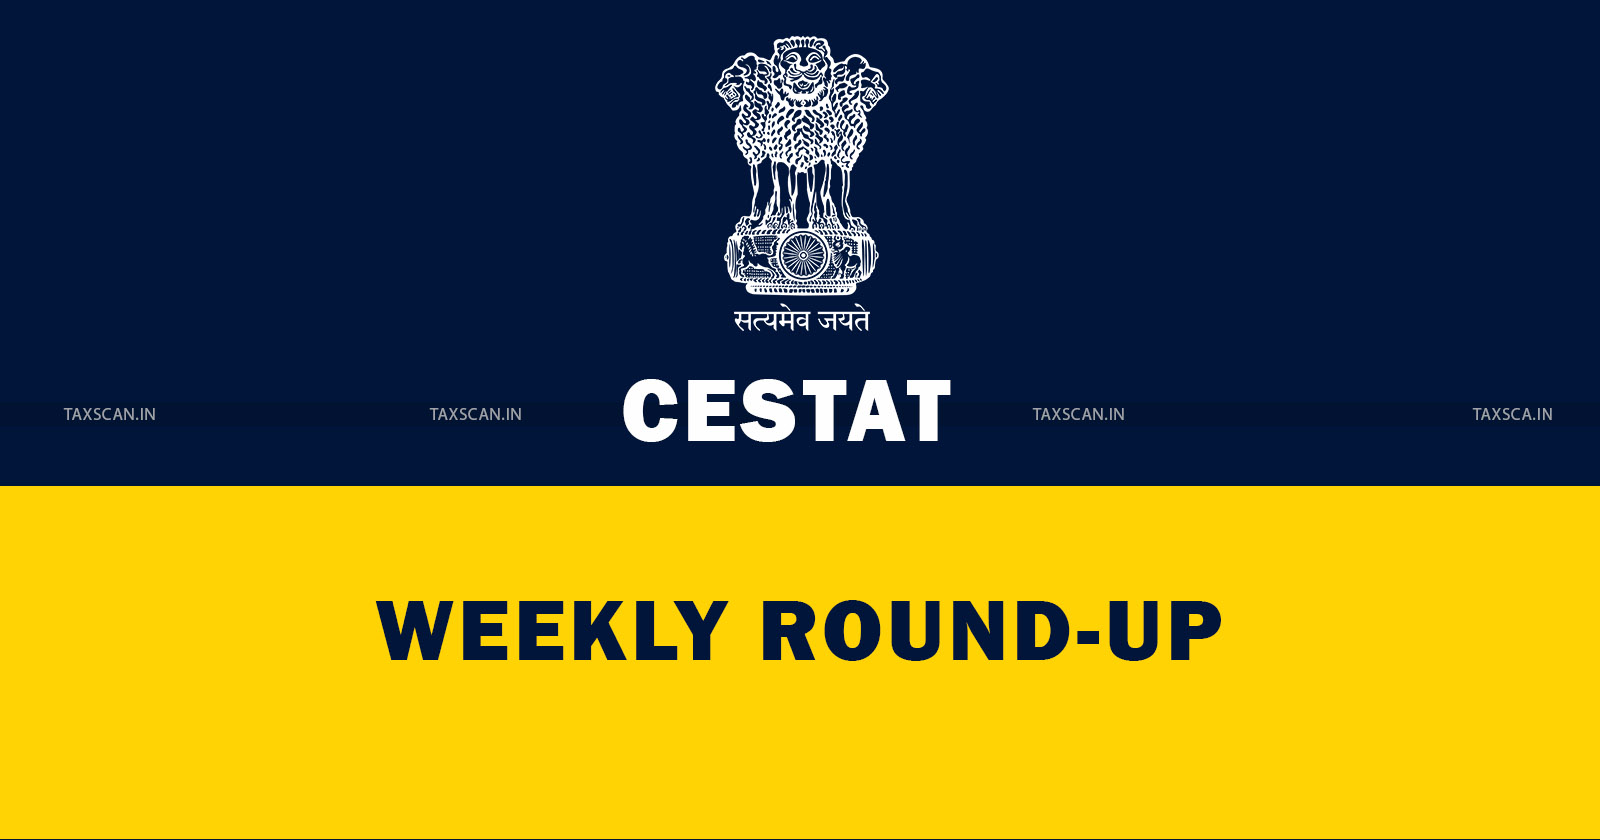 CESTAT - Weekly Round - Up - TAXSCAN